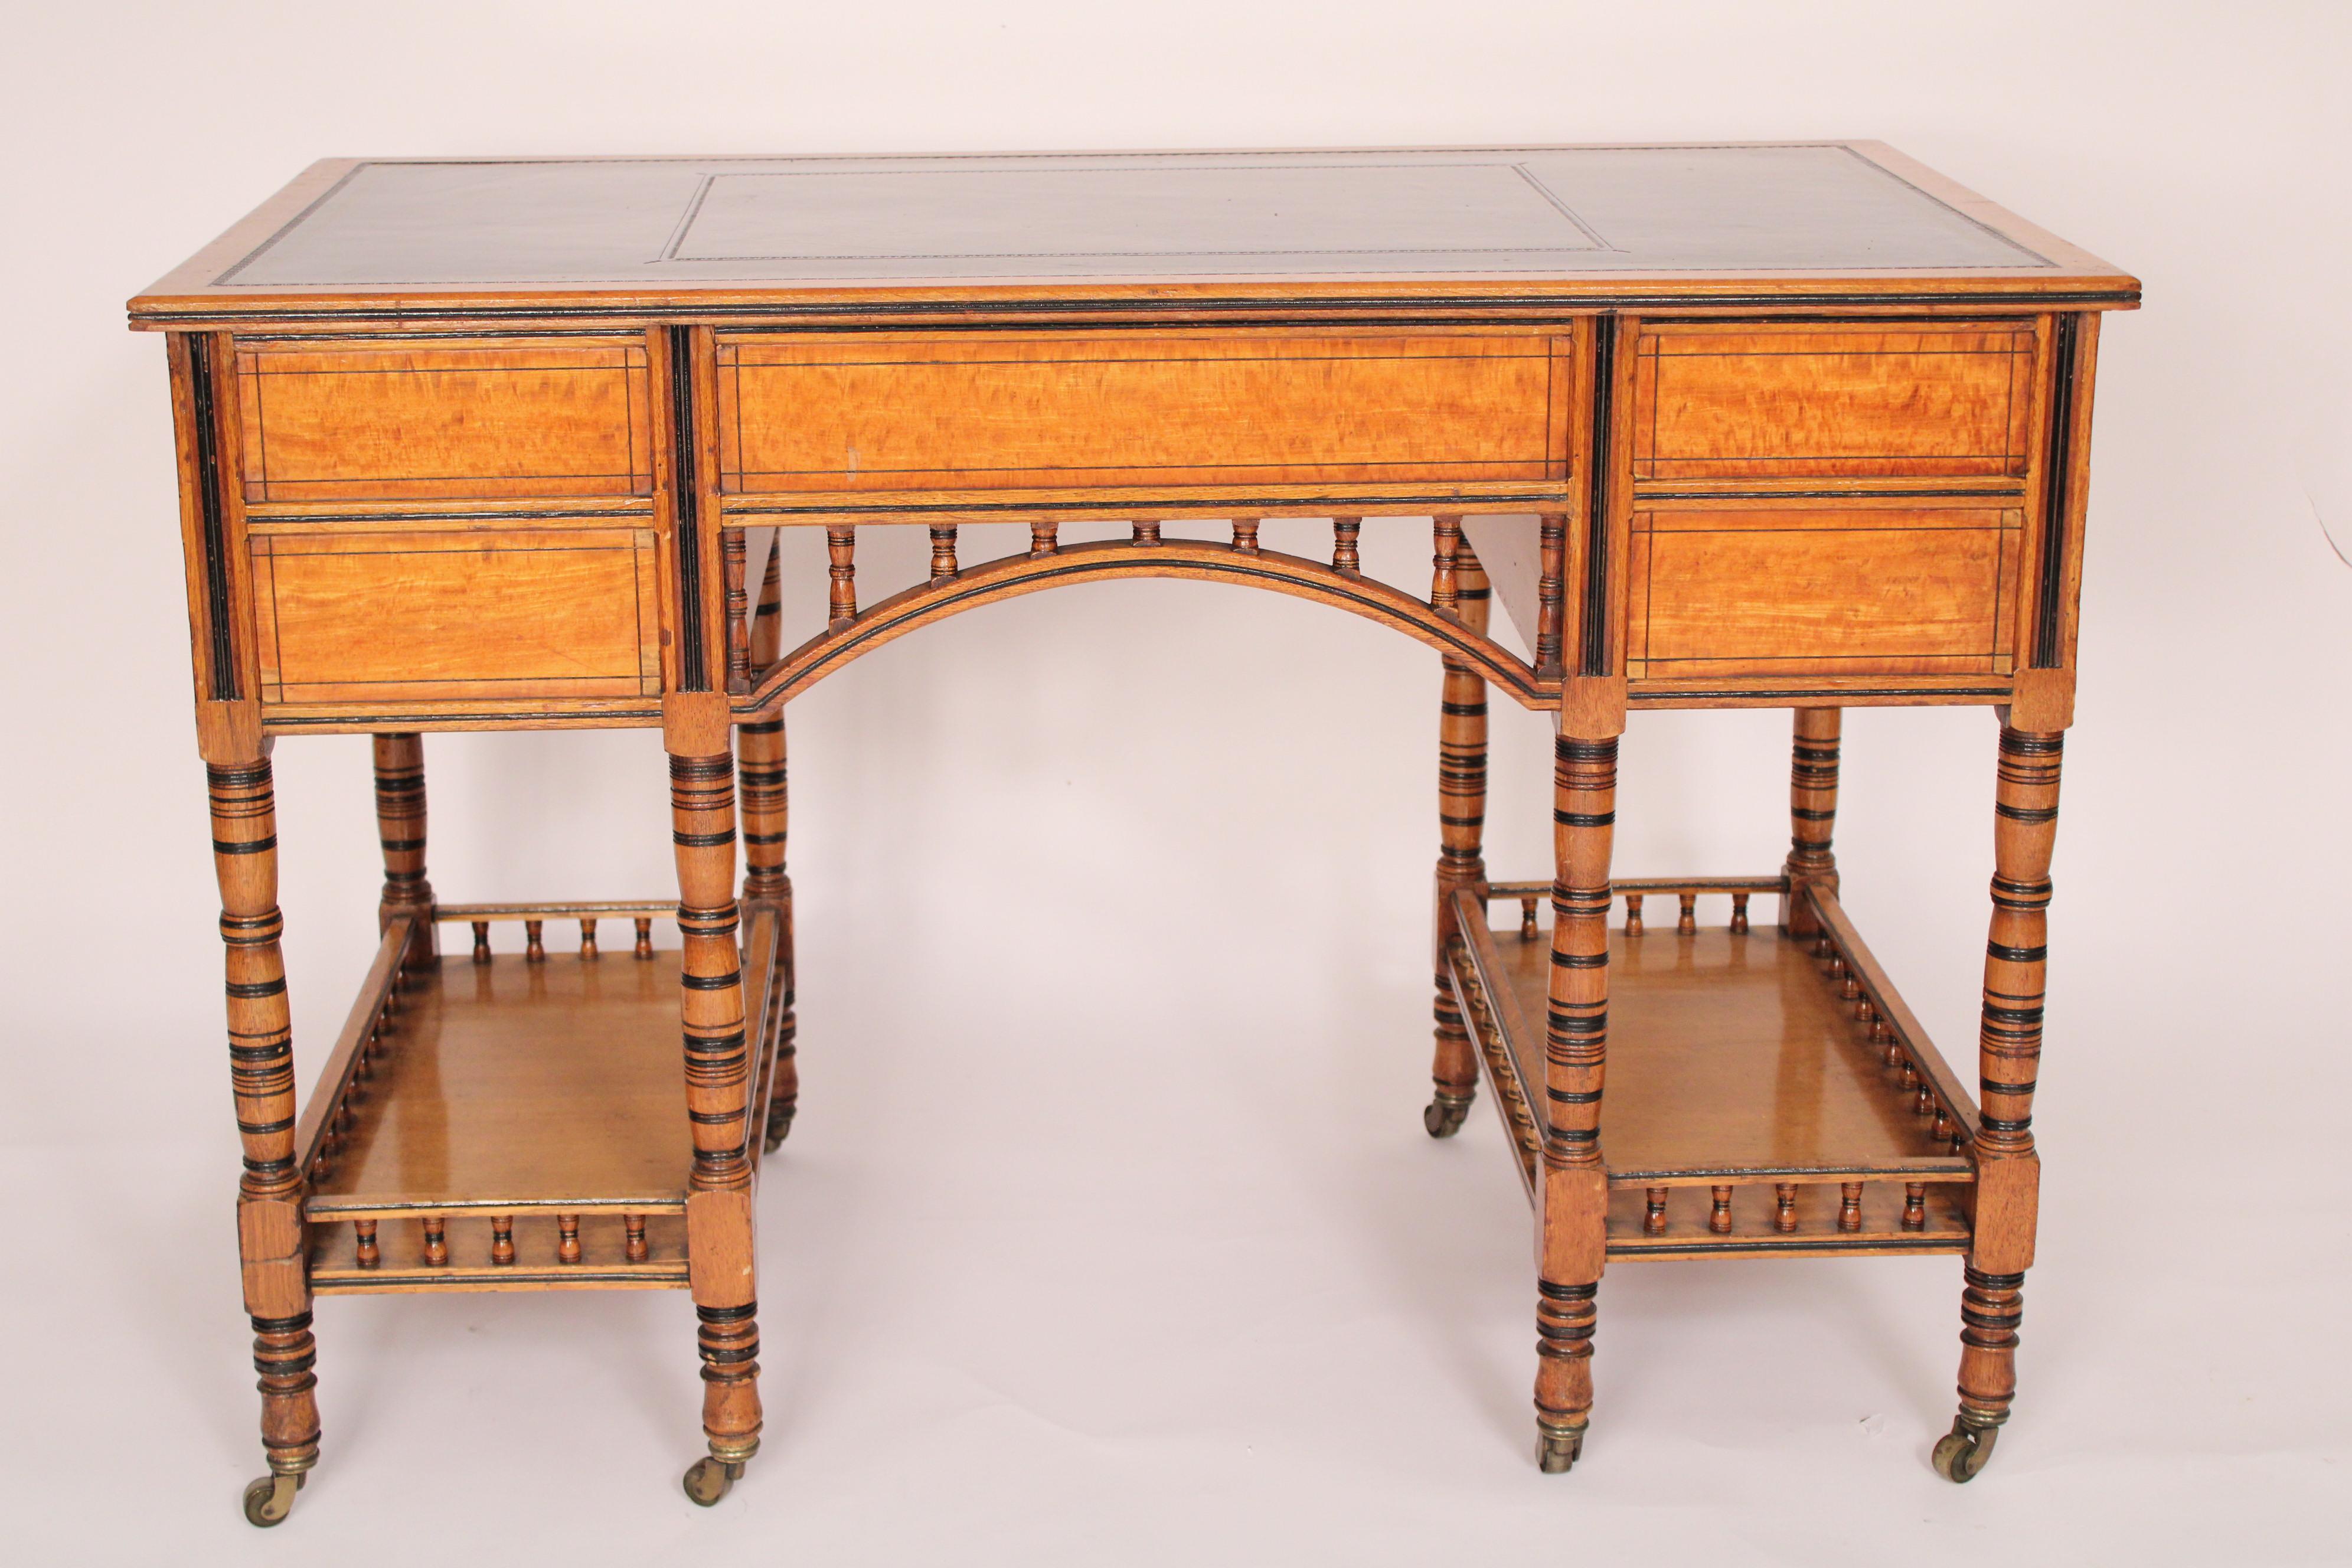 Early 20th Century Aesthetic Movement Satin wood and Oak Leather Top Desk